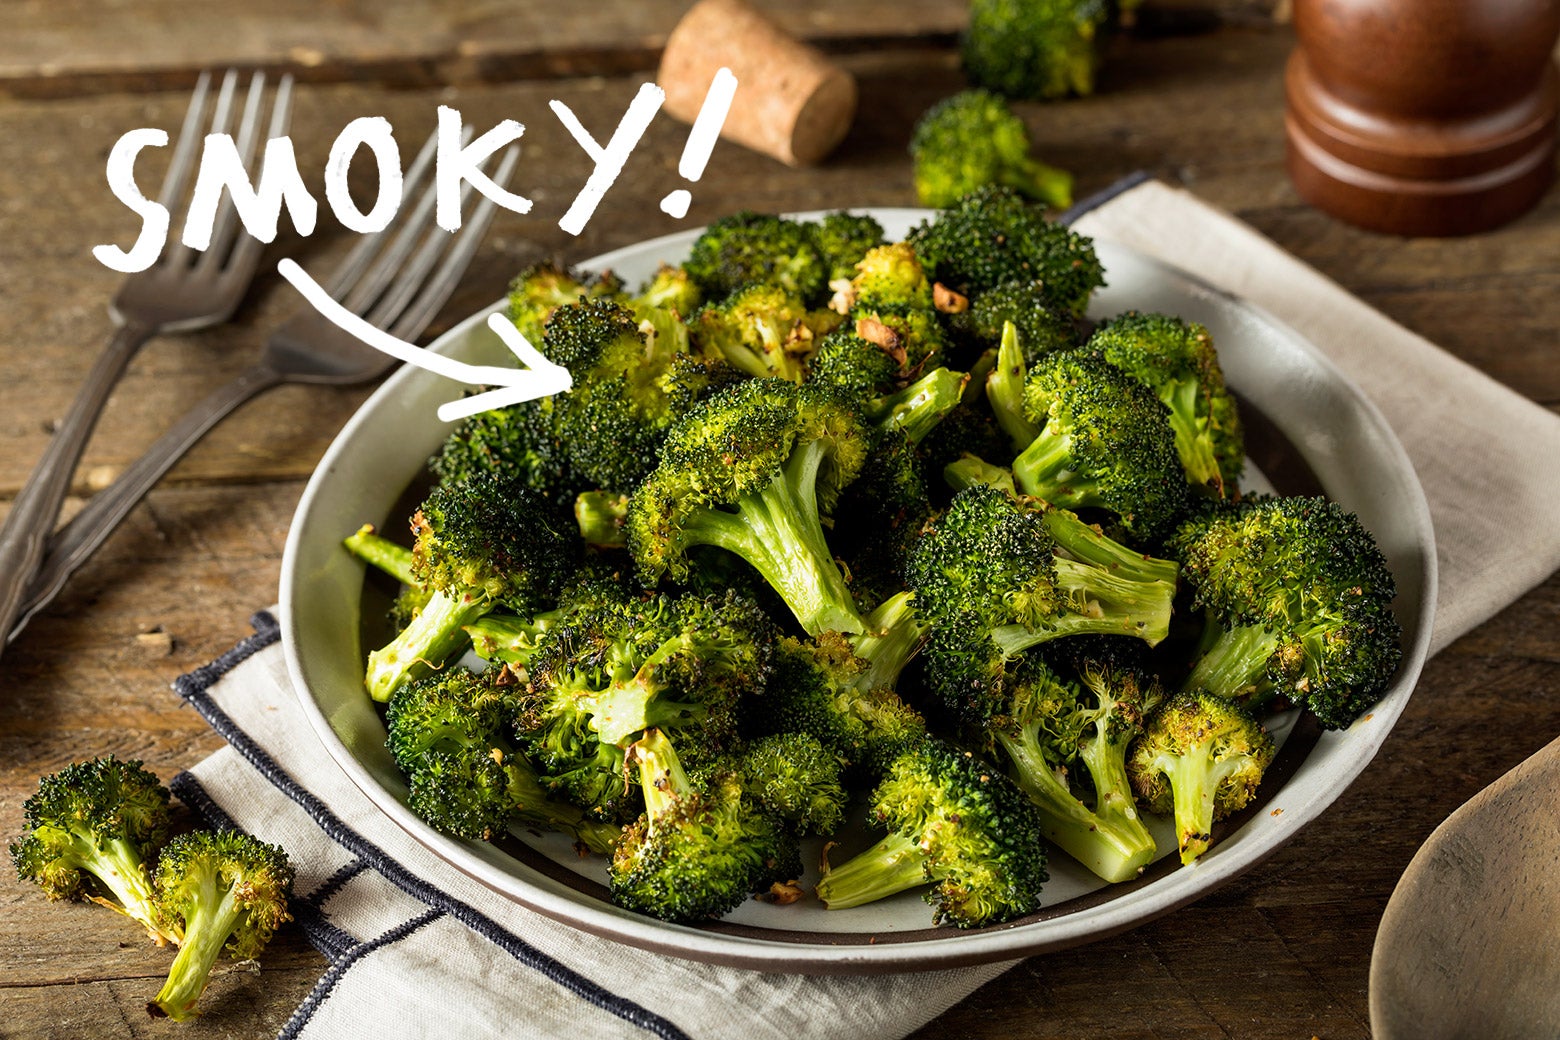 A dish of broccoli florets seasoned with pimentón de la Vera, with the word "SMOKY!" hovering over it.